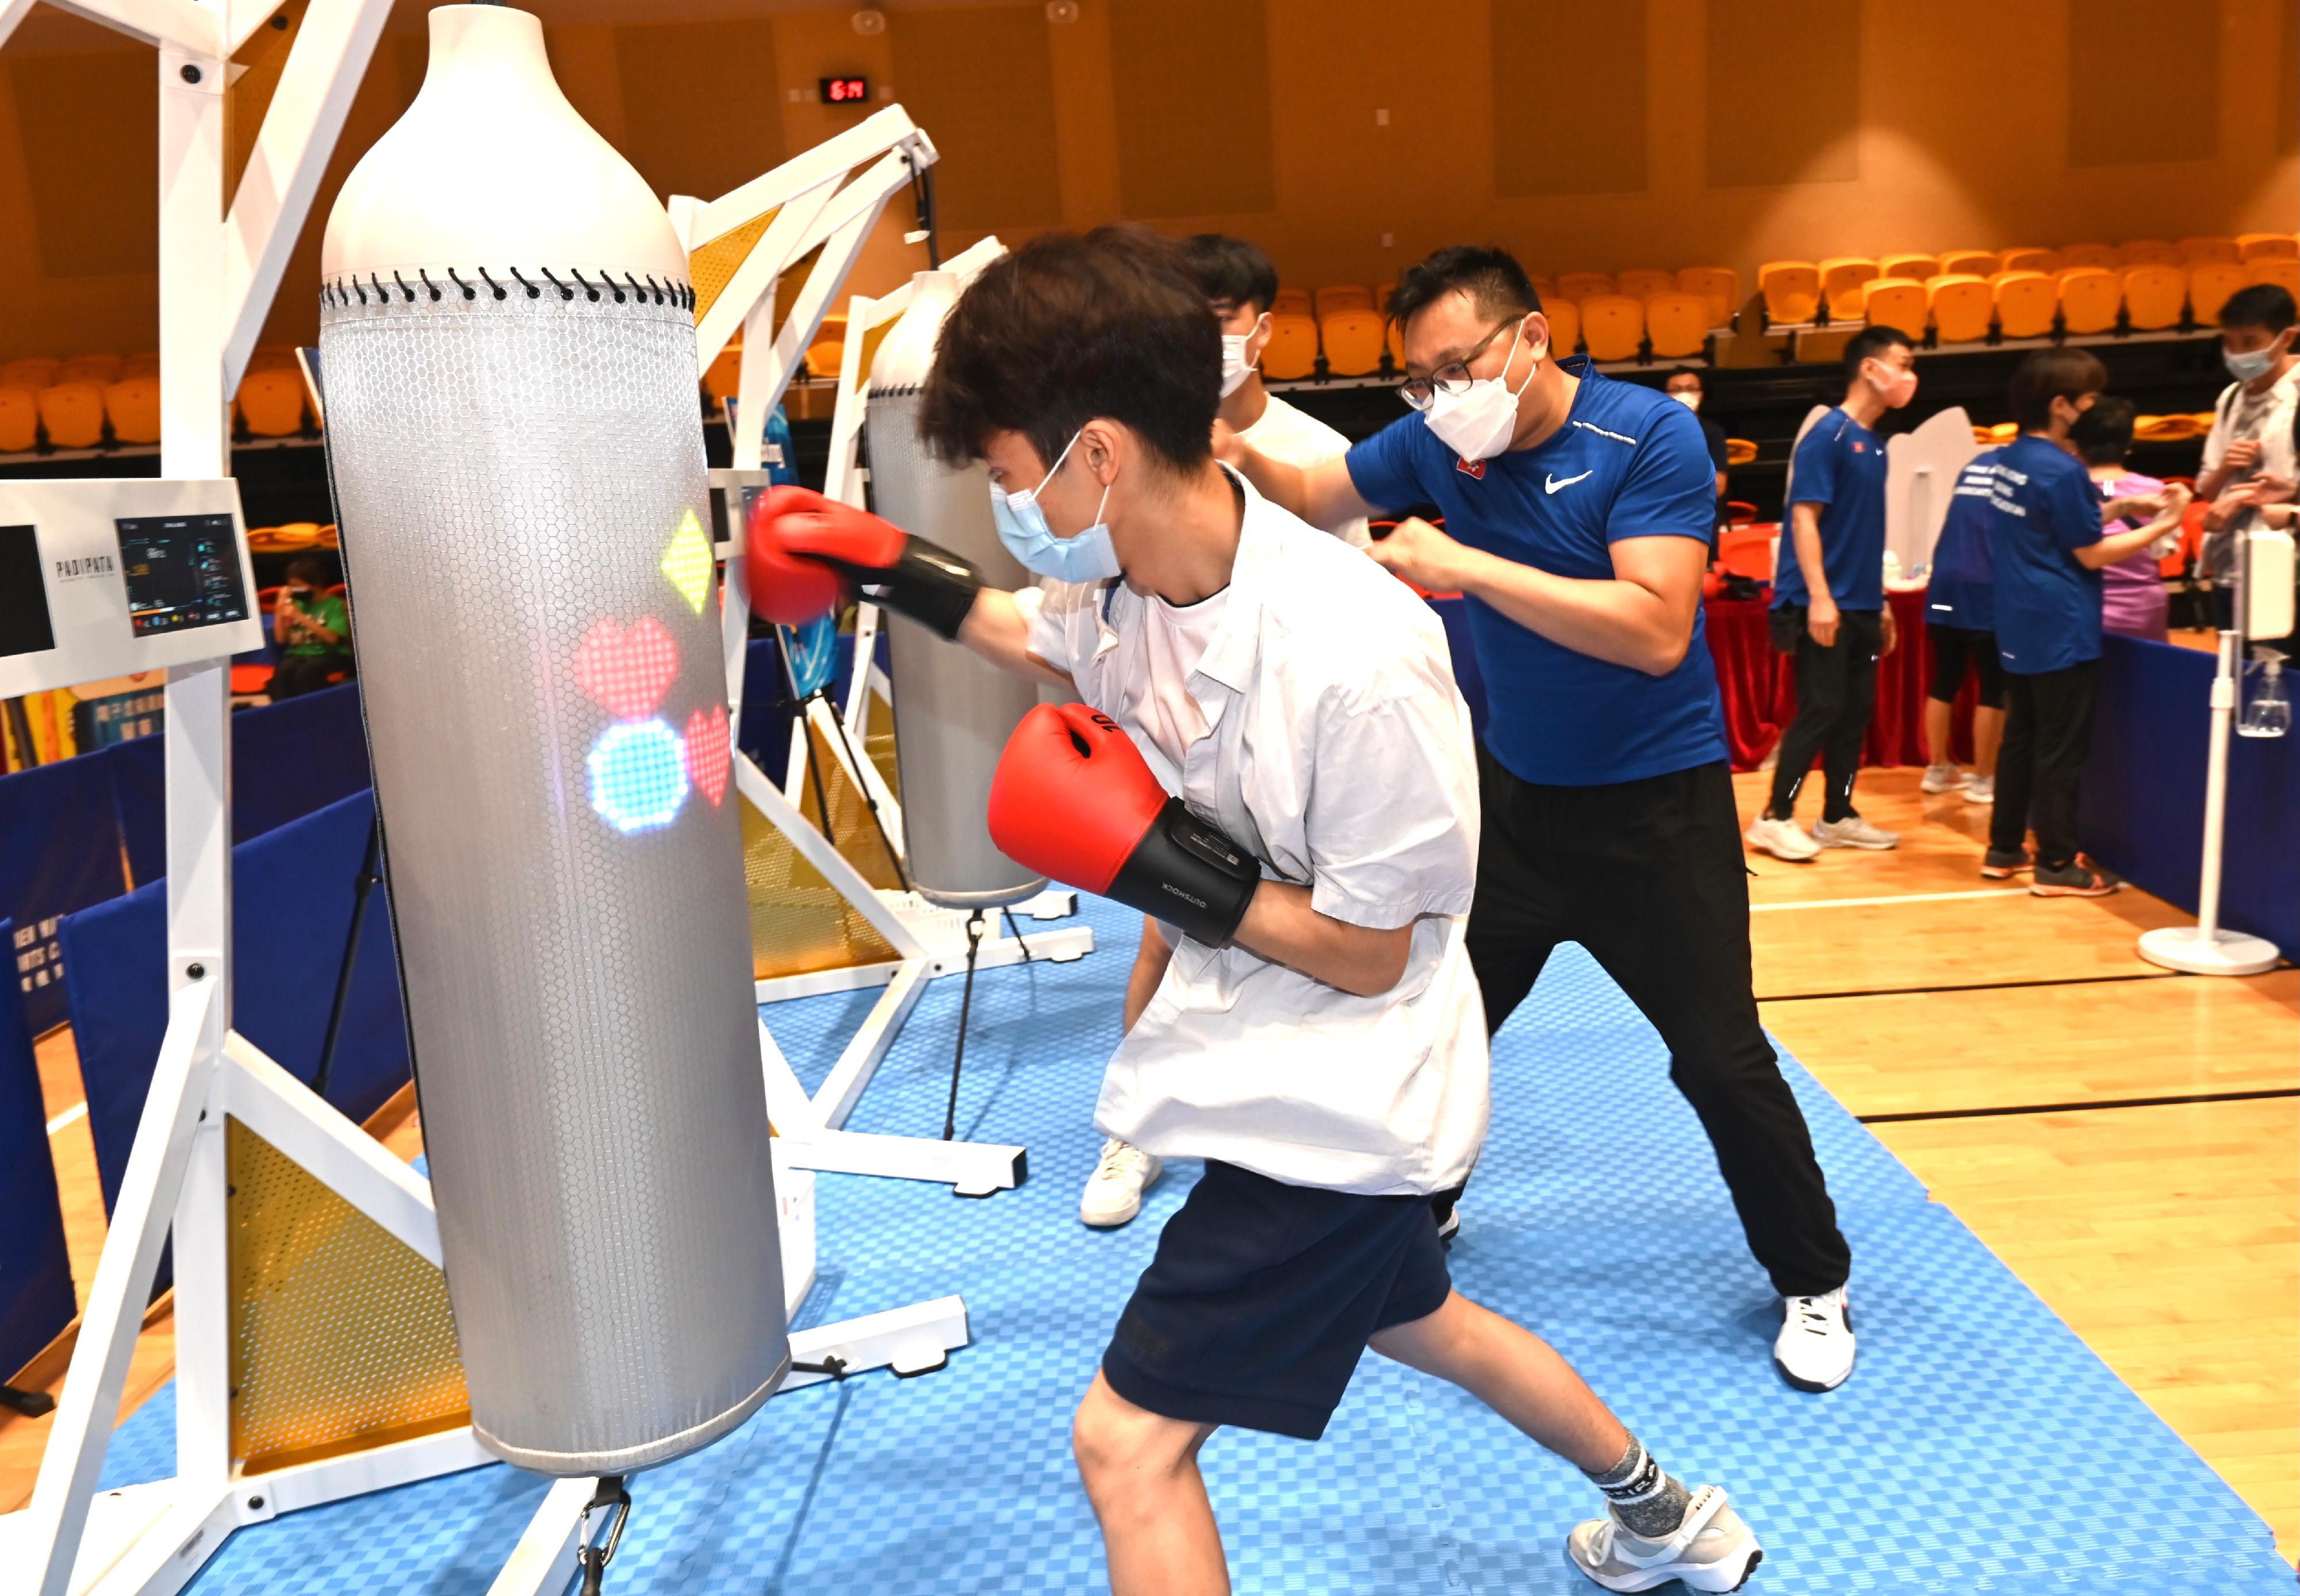 The Leisure and Cultural Services Department organised a number of free recreation and sports programmes at designated sports centres in 18 districts for public participation at Sport For All Day 2022 today (August 7). Photo shows the members of the public participating in fun game.